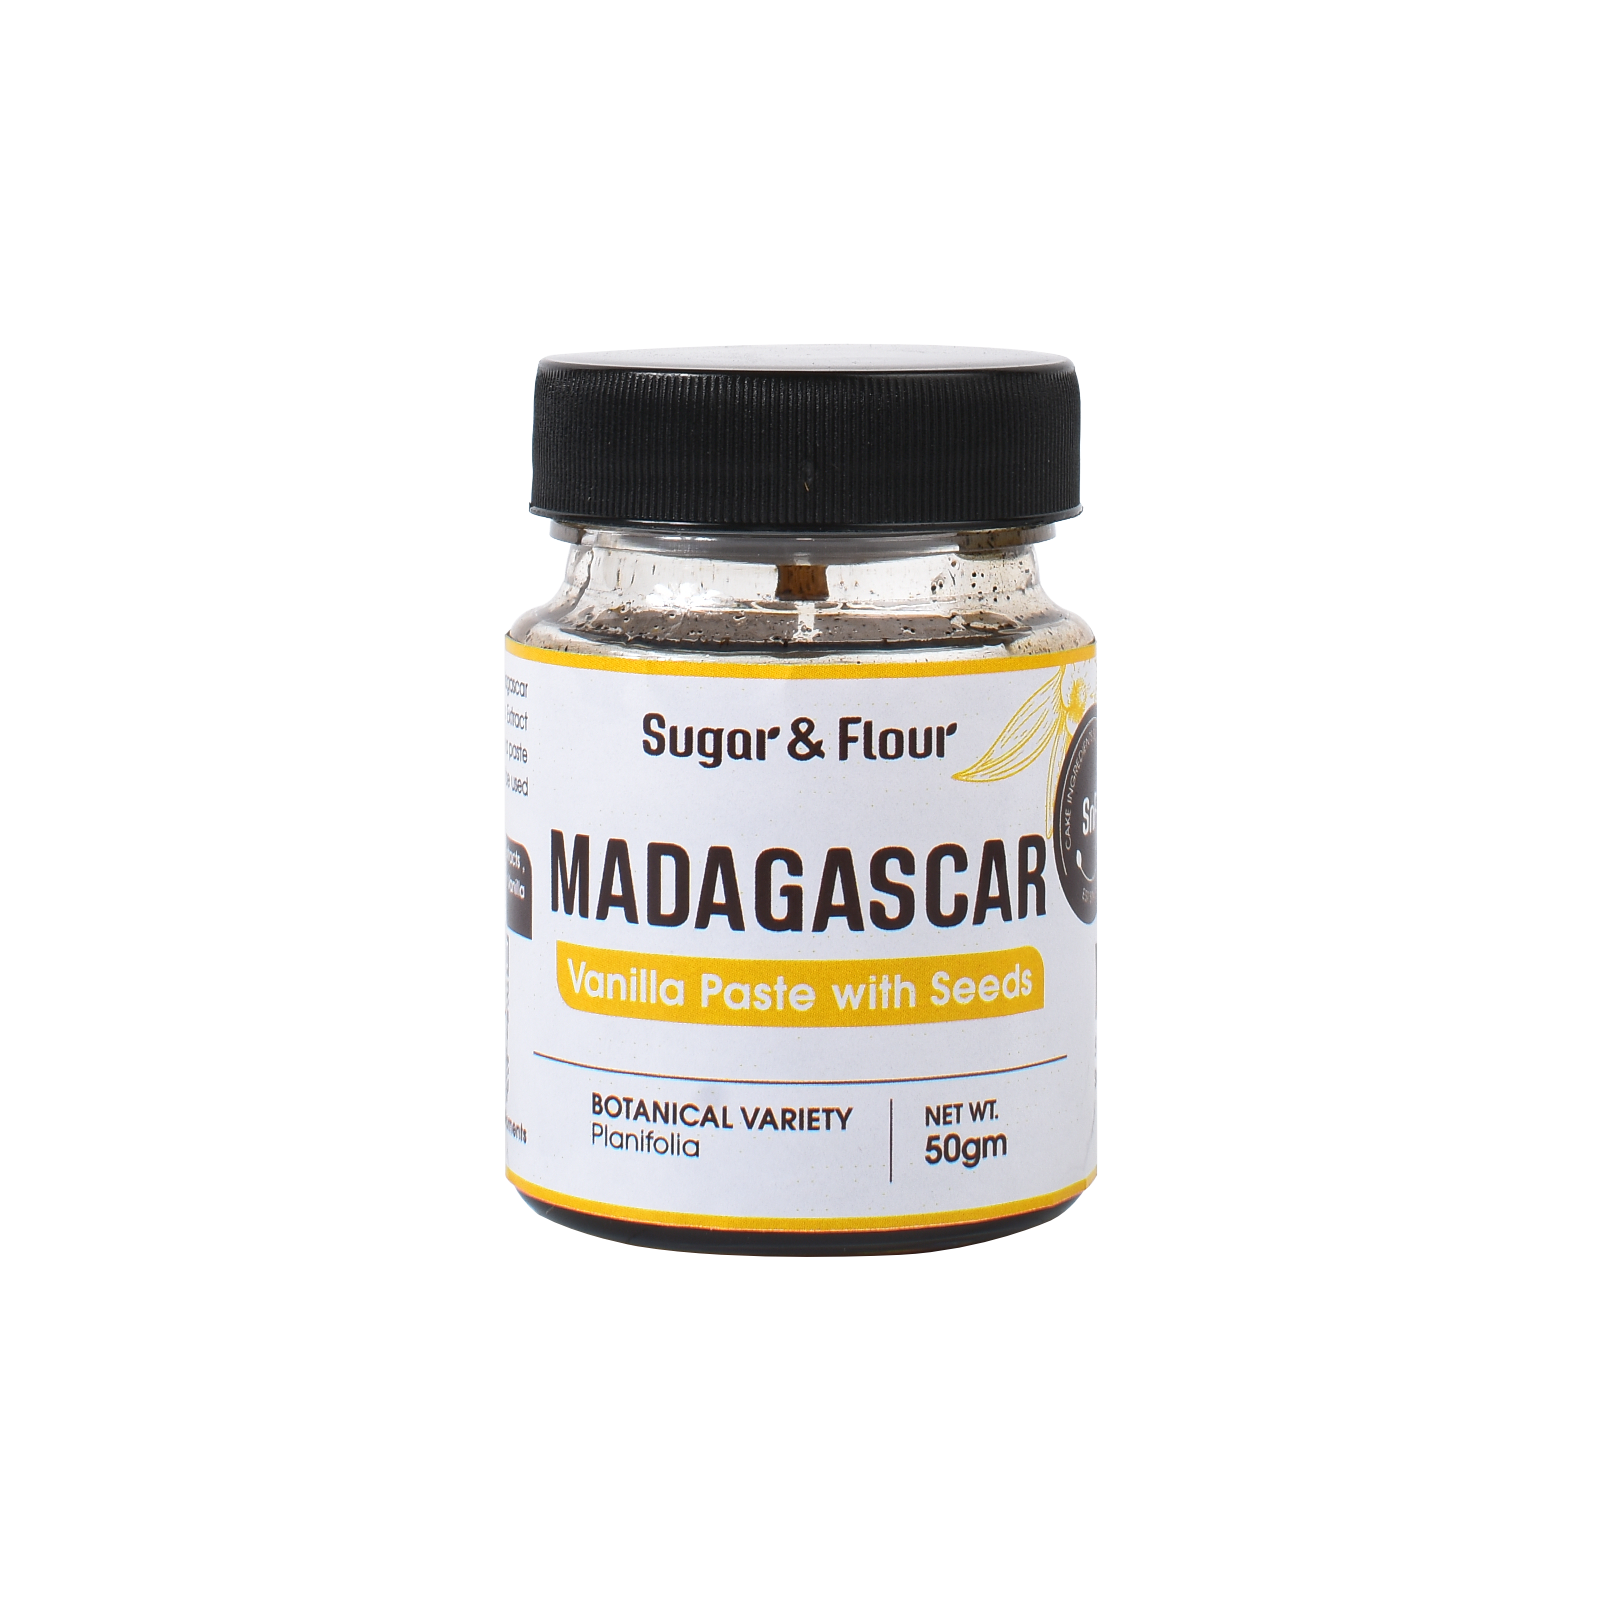 Snf Madagascar Vanilla Paste with seeds 50gm.png